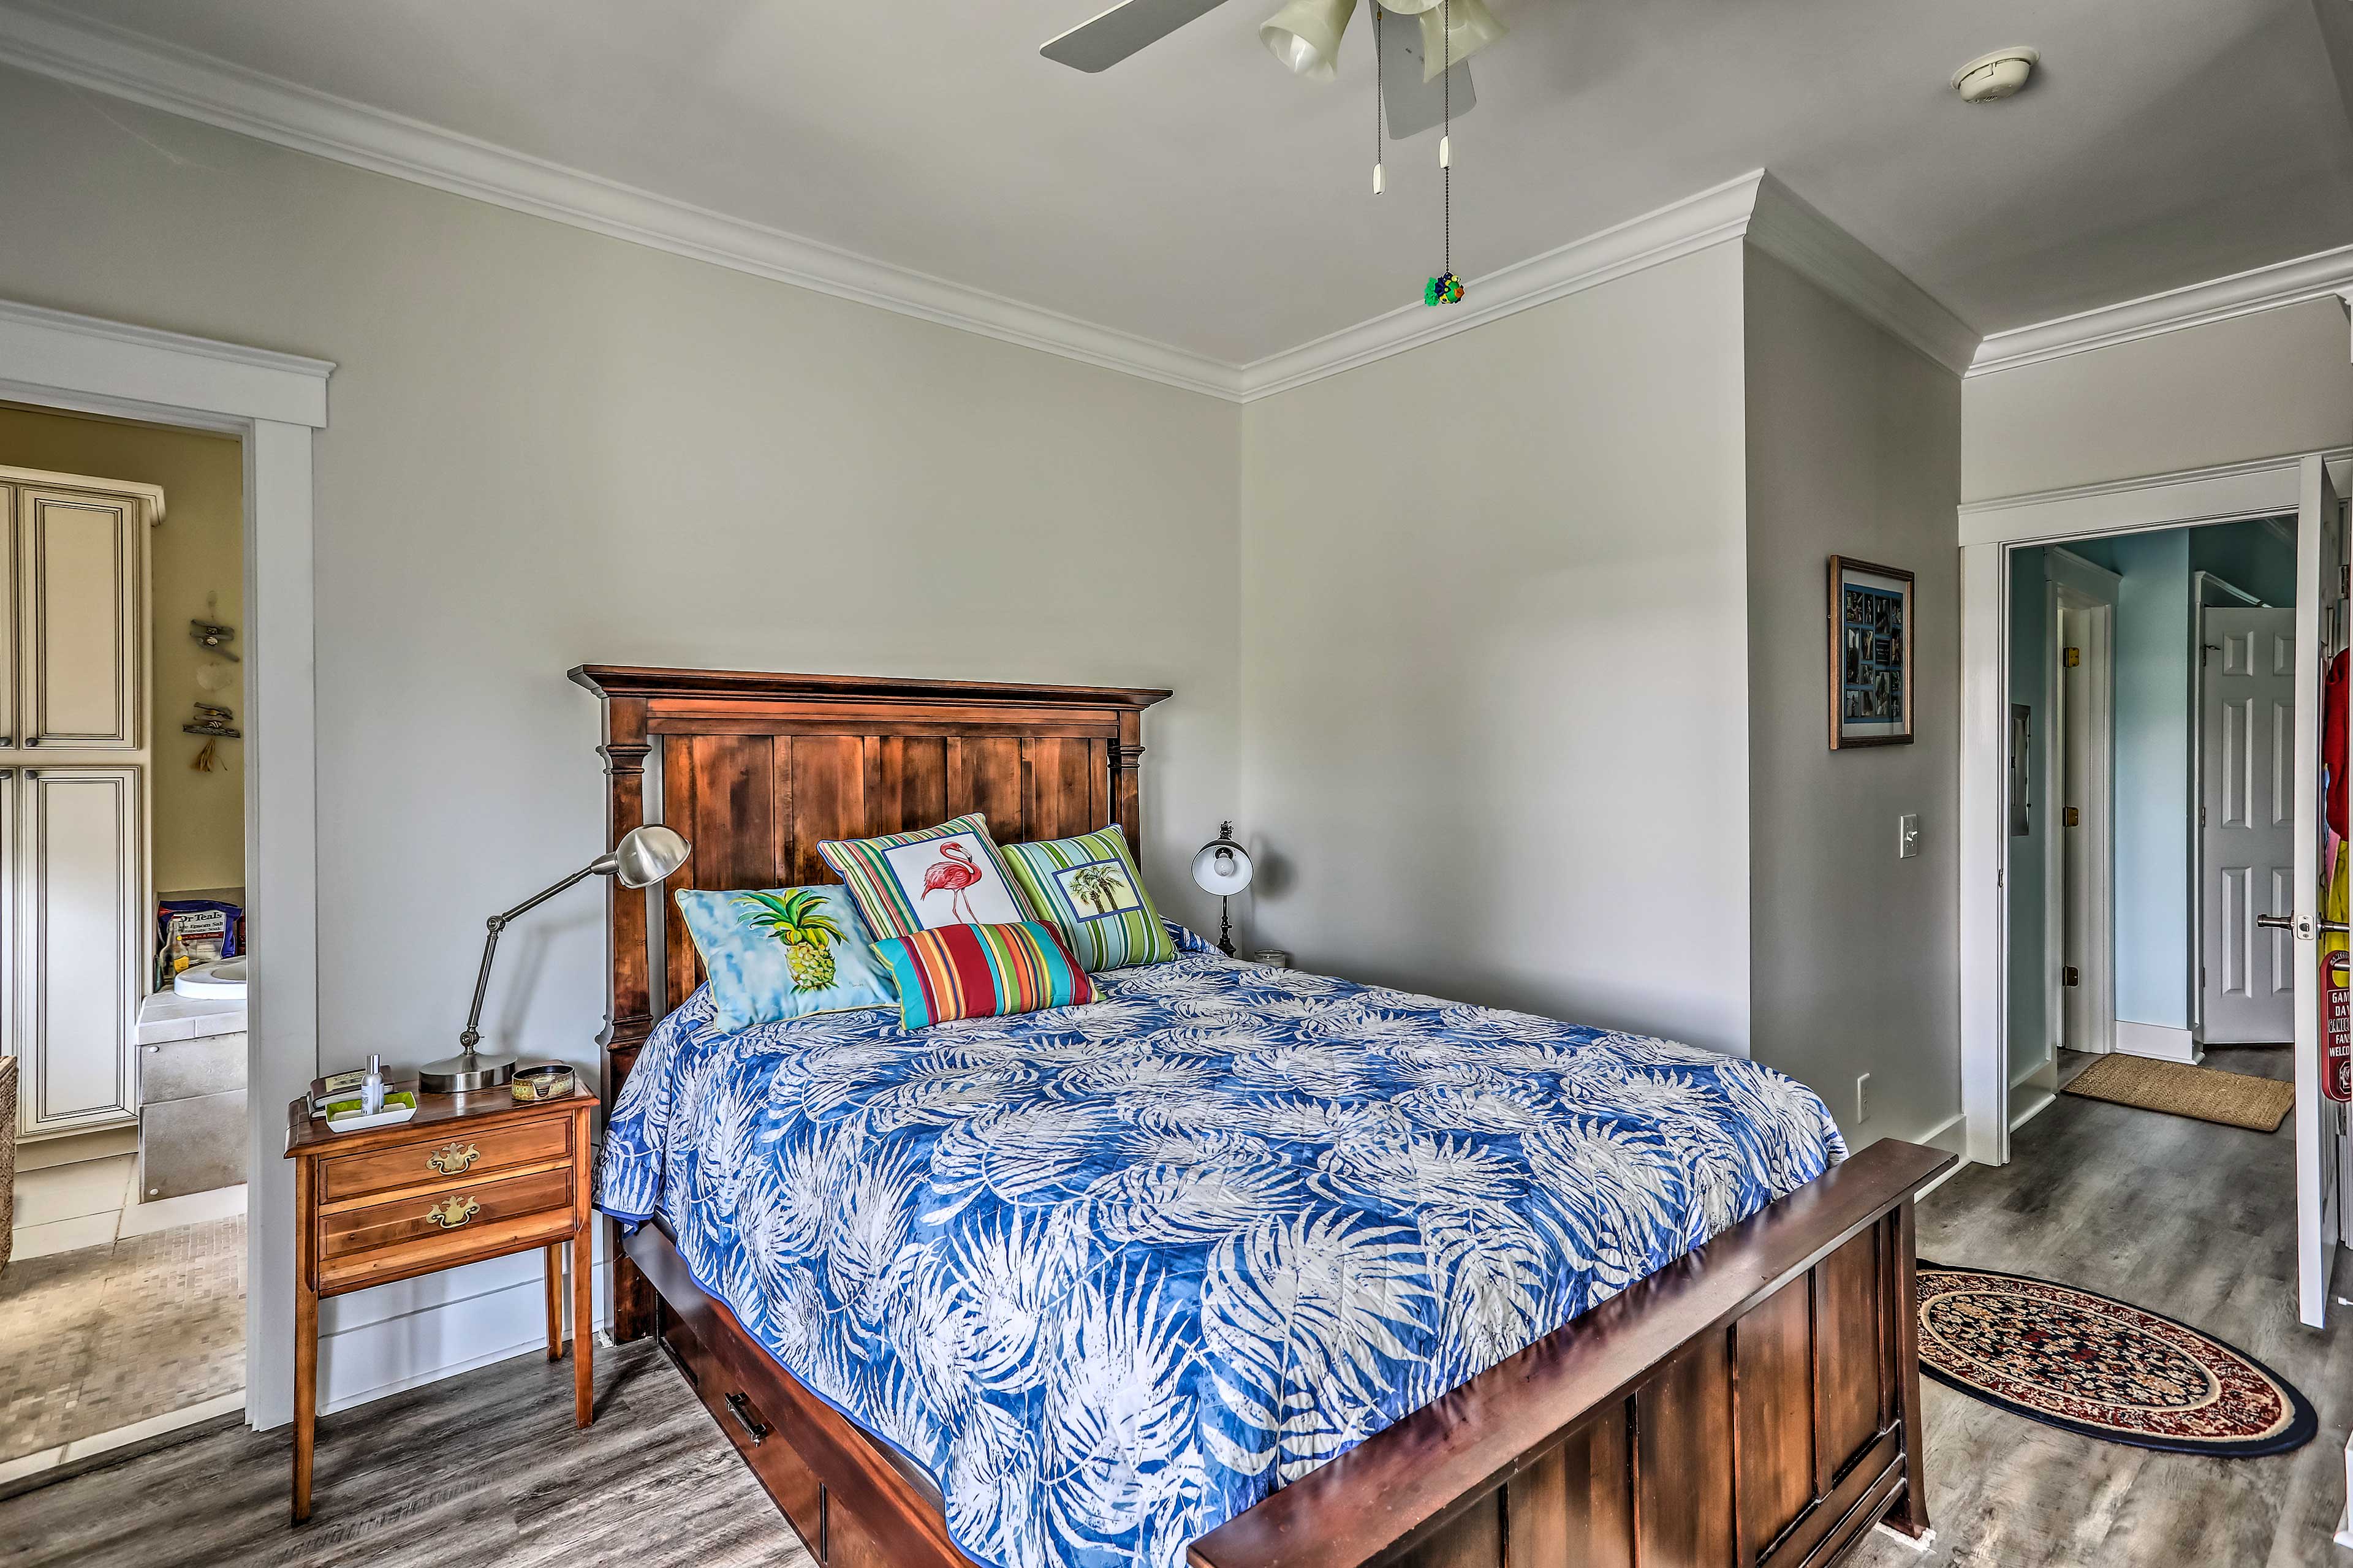 Wake refreshed in this queen bed.